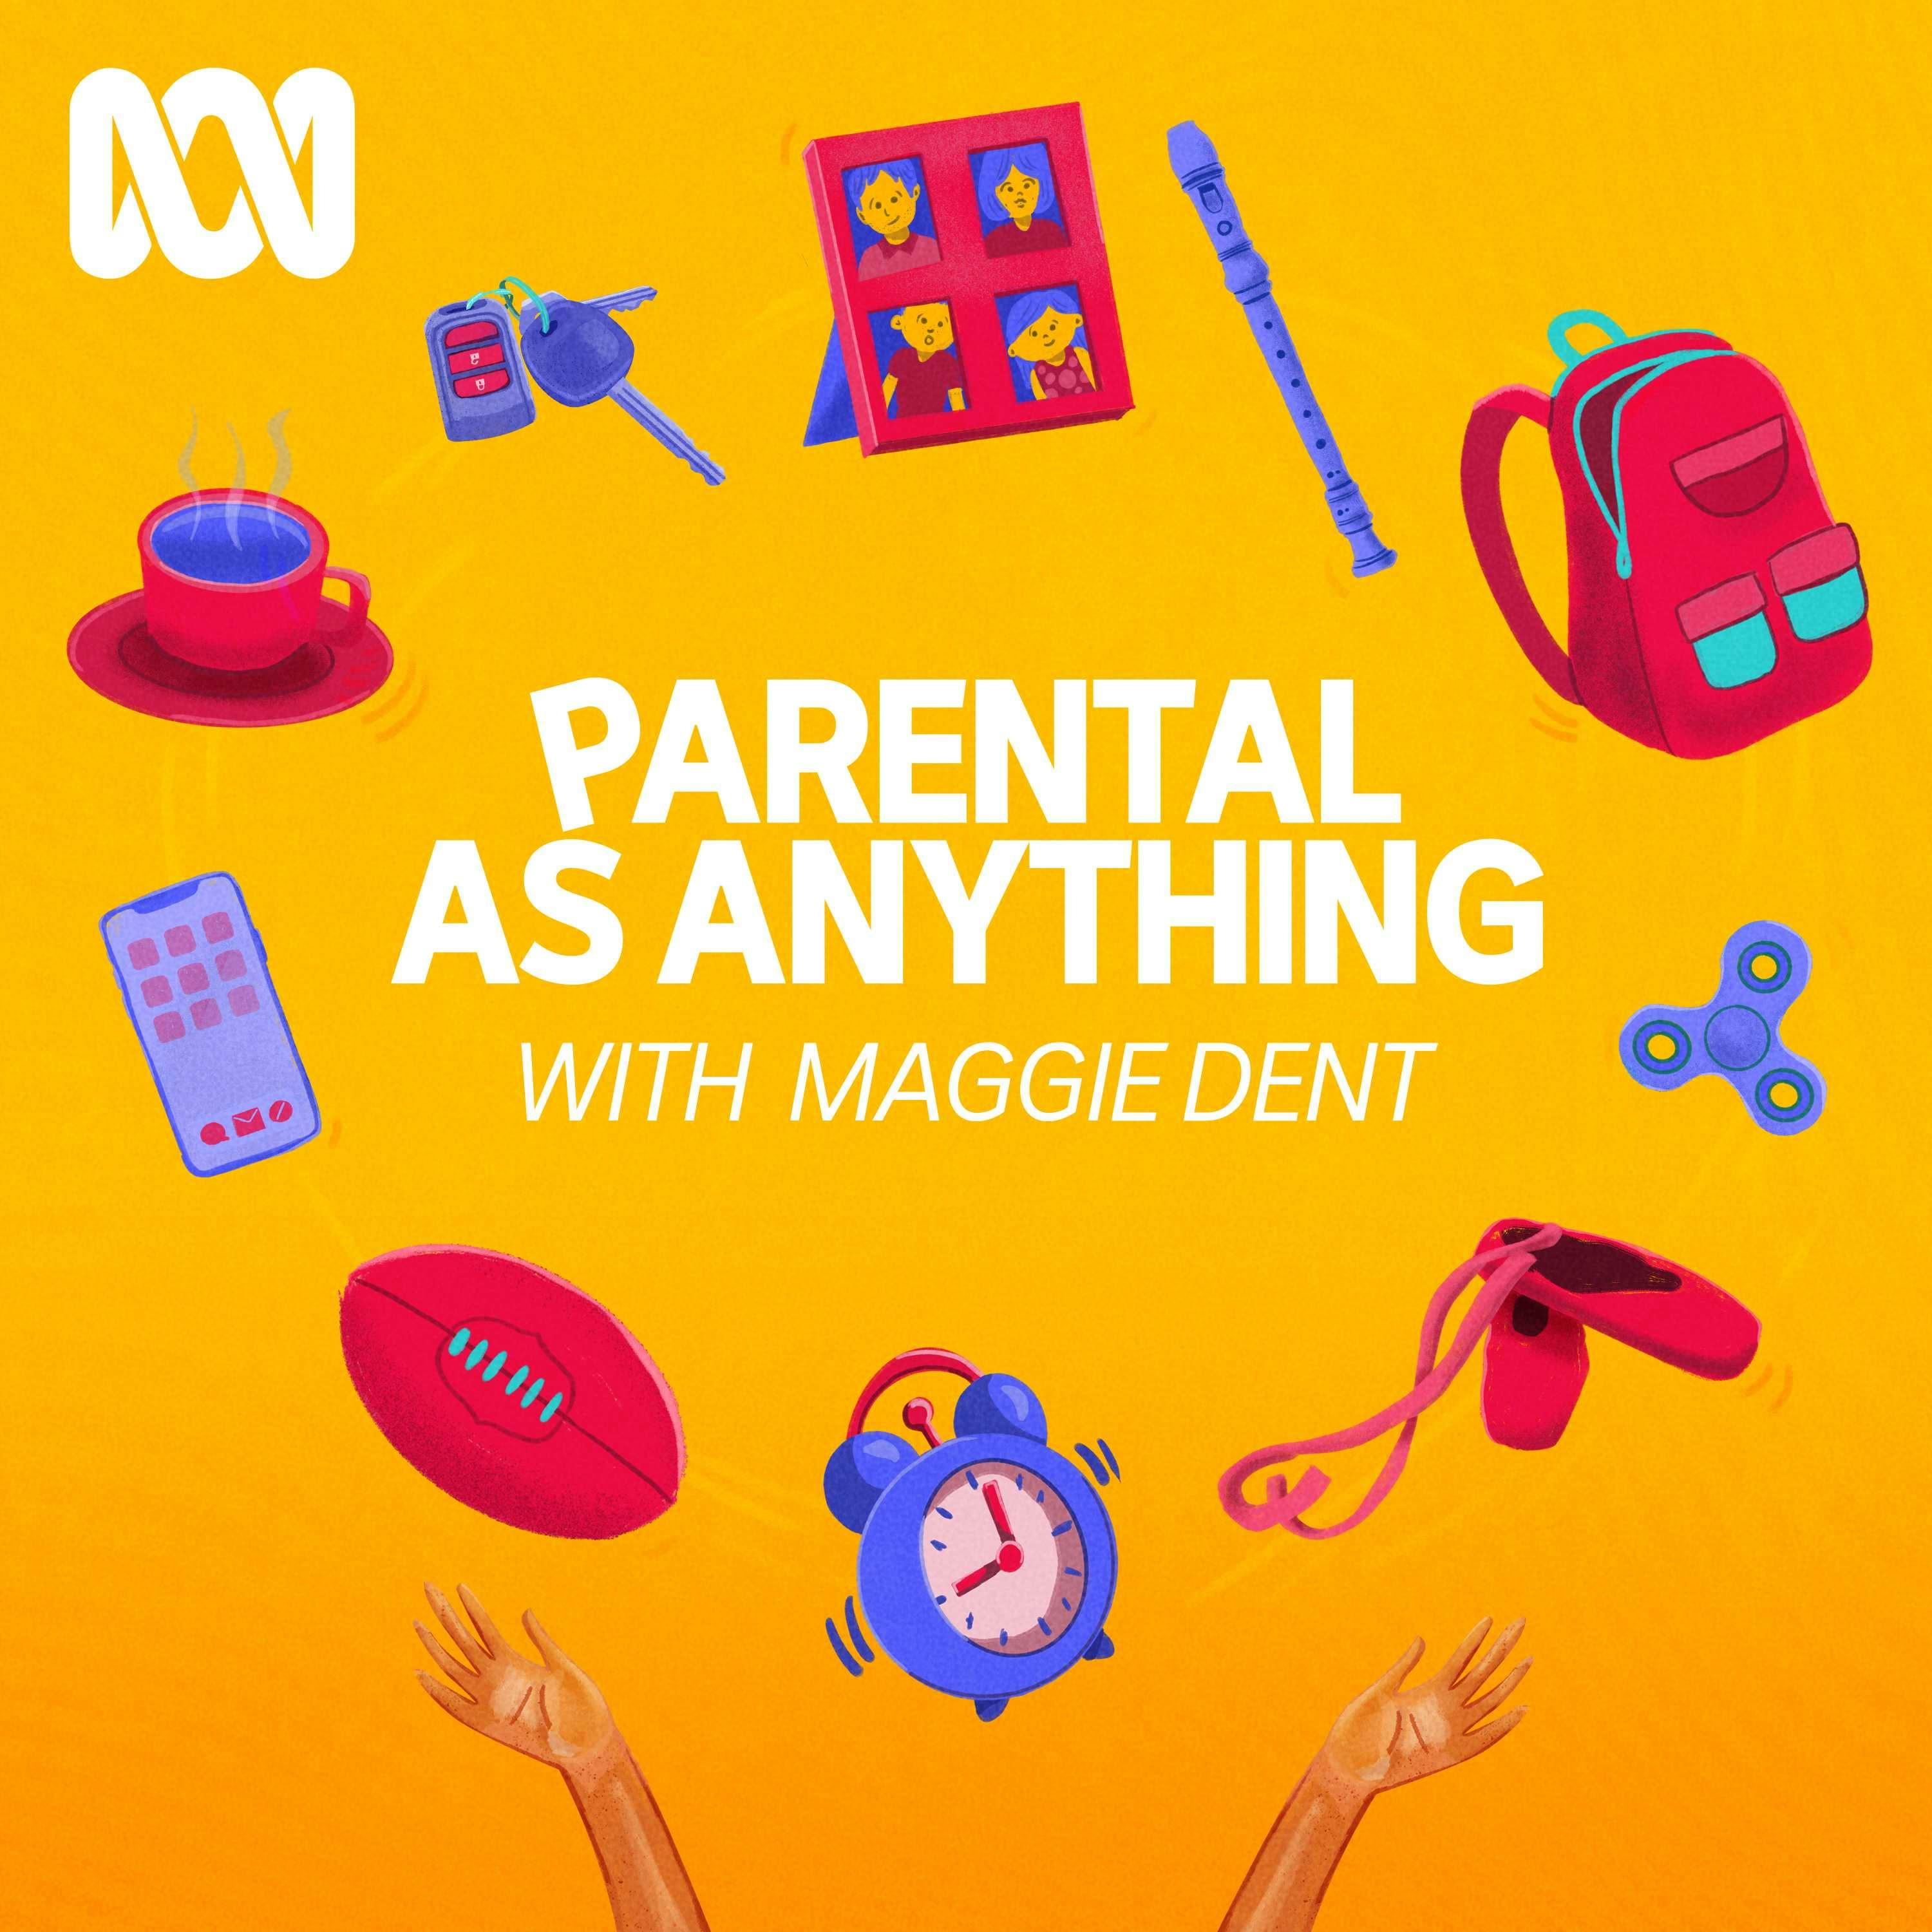 INTRODUCING — Parental As Anything, with Maggie Dent